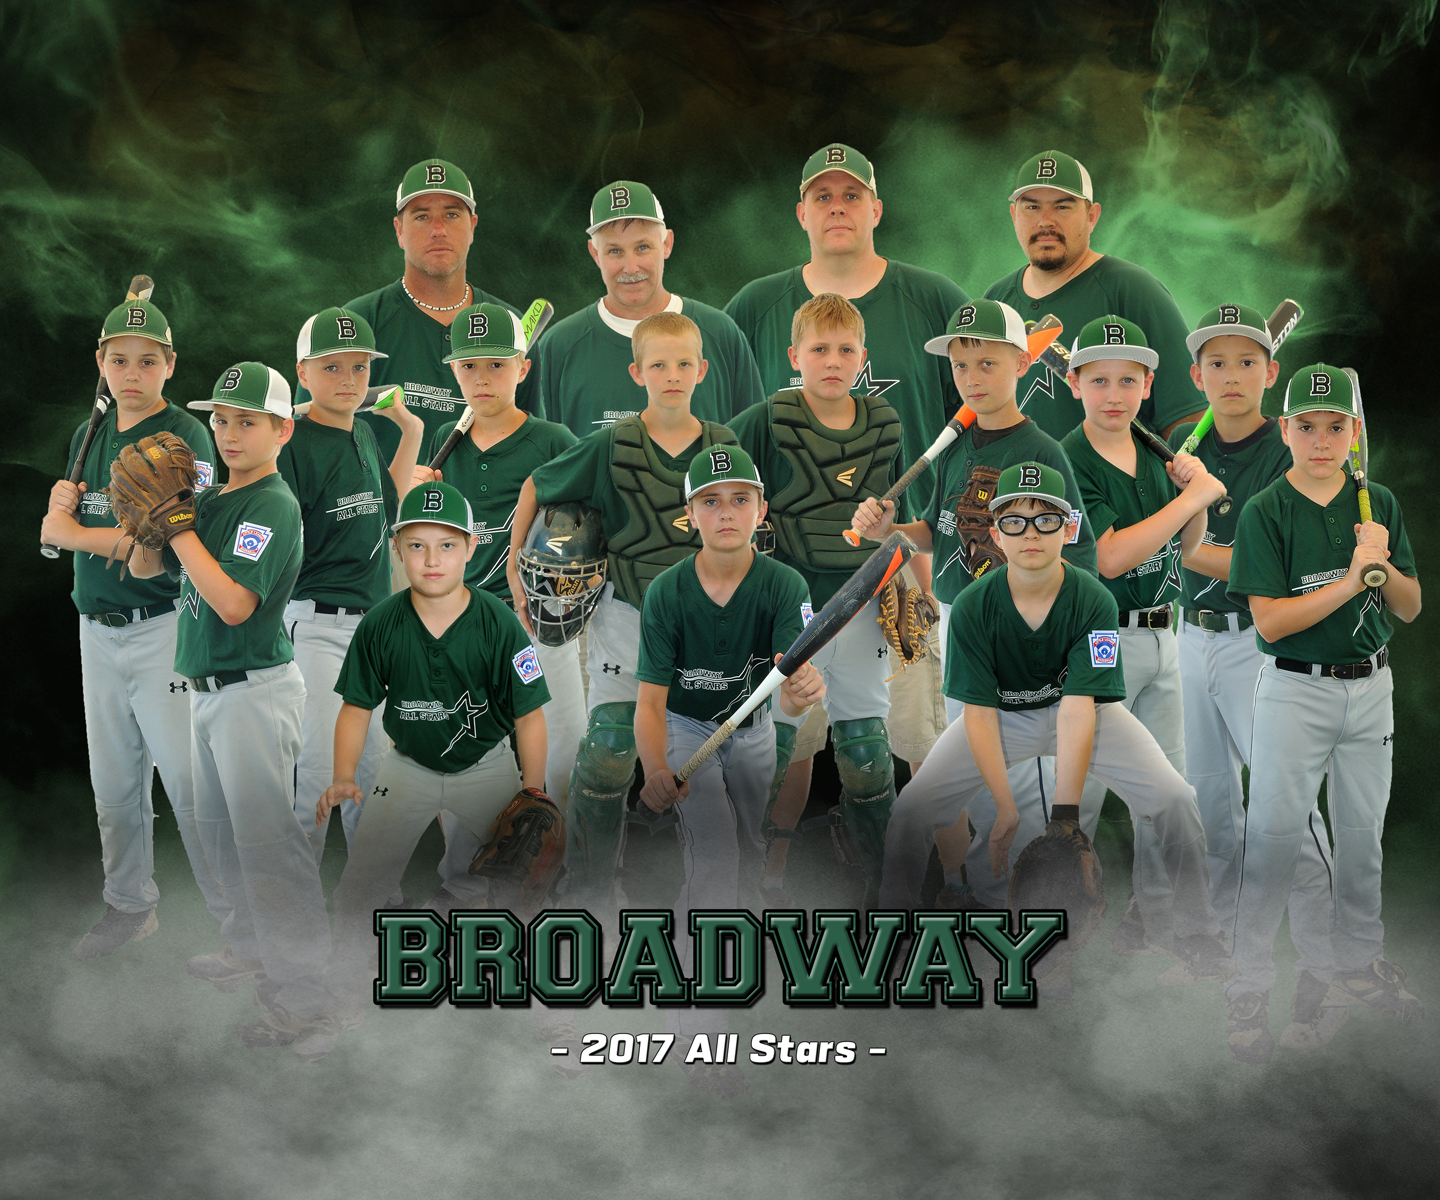 Little League All Star Photo and banner